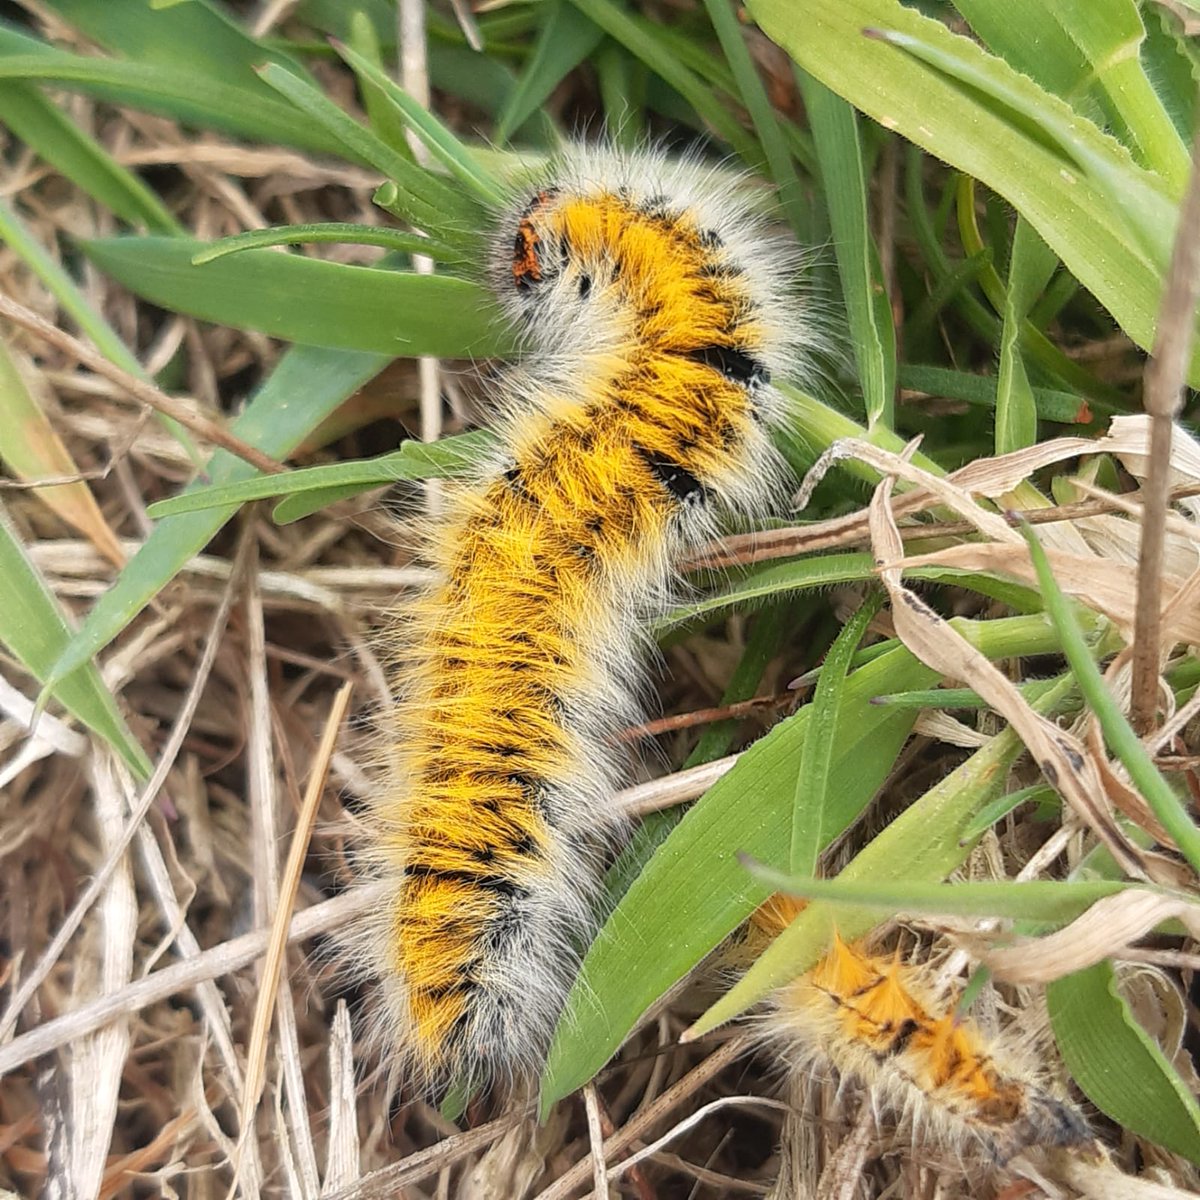 The Grass Eggar #Caterpillar; spotted by our #Rangers this week in its different colour variations here in #Scilly 🐛 These two 'floofs' were seen on @stmartinsscilly; aren't they beautiful? 🐛 Nationally Scarce in the UK & predominantly found in the South West. 📷Ranger Darren